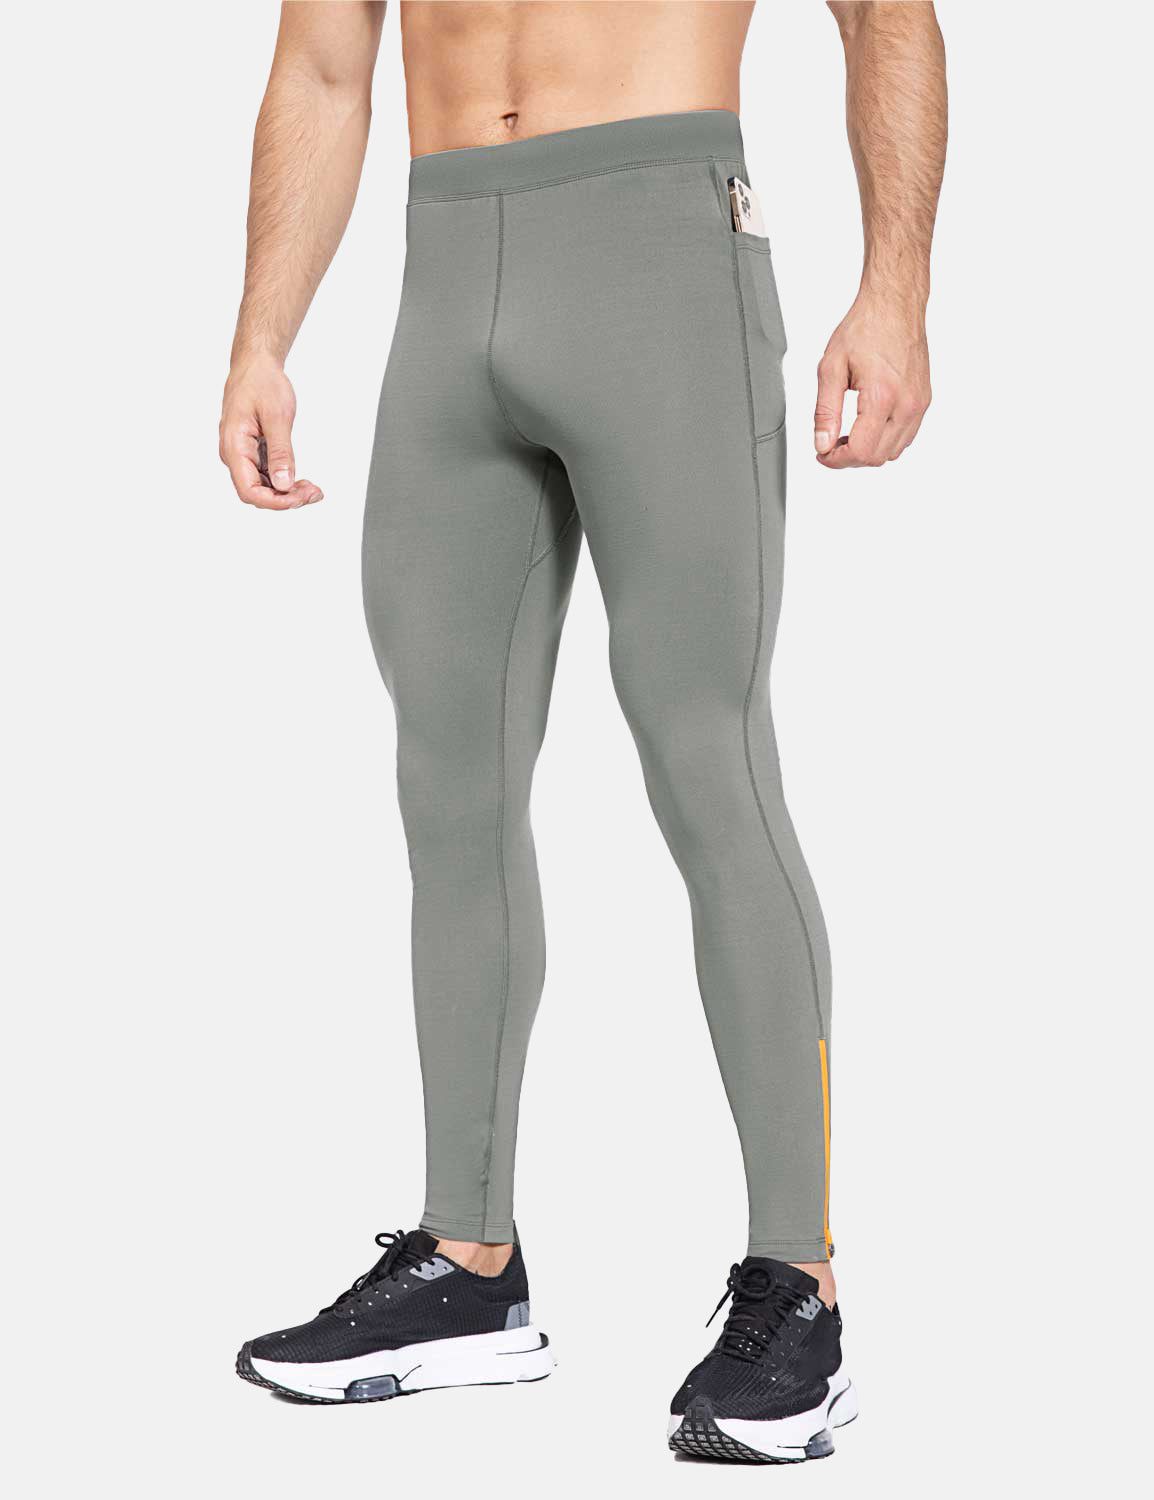 Baleaf Men's Laureate 29" Thermal Water-Resistant Tights cbd048 Frost Gray Main